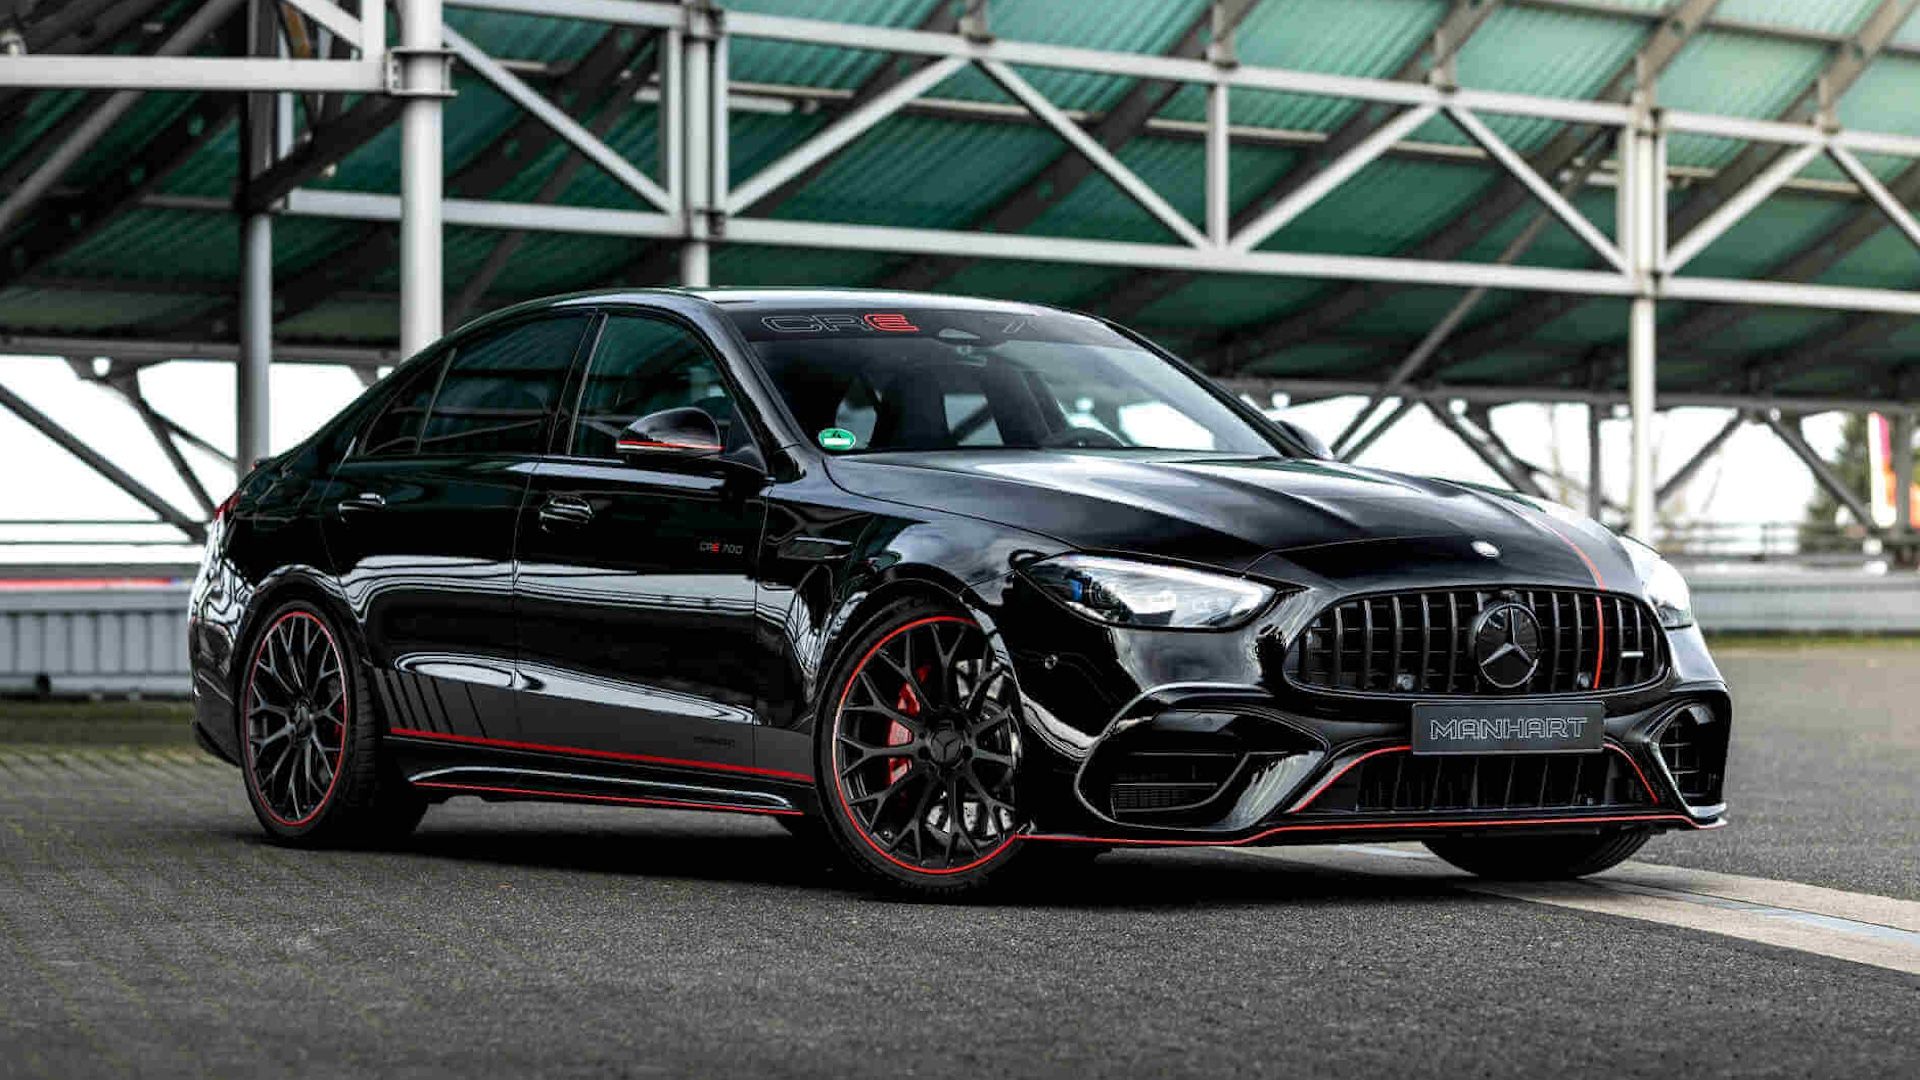 Manhart CRE 700 based on the Mercedes-AMG C63 S E Performance